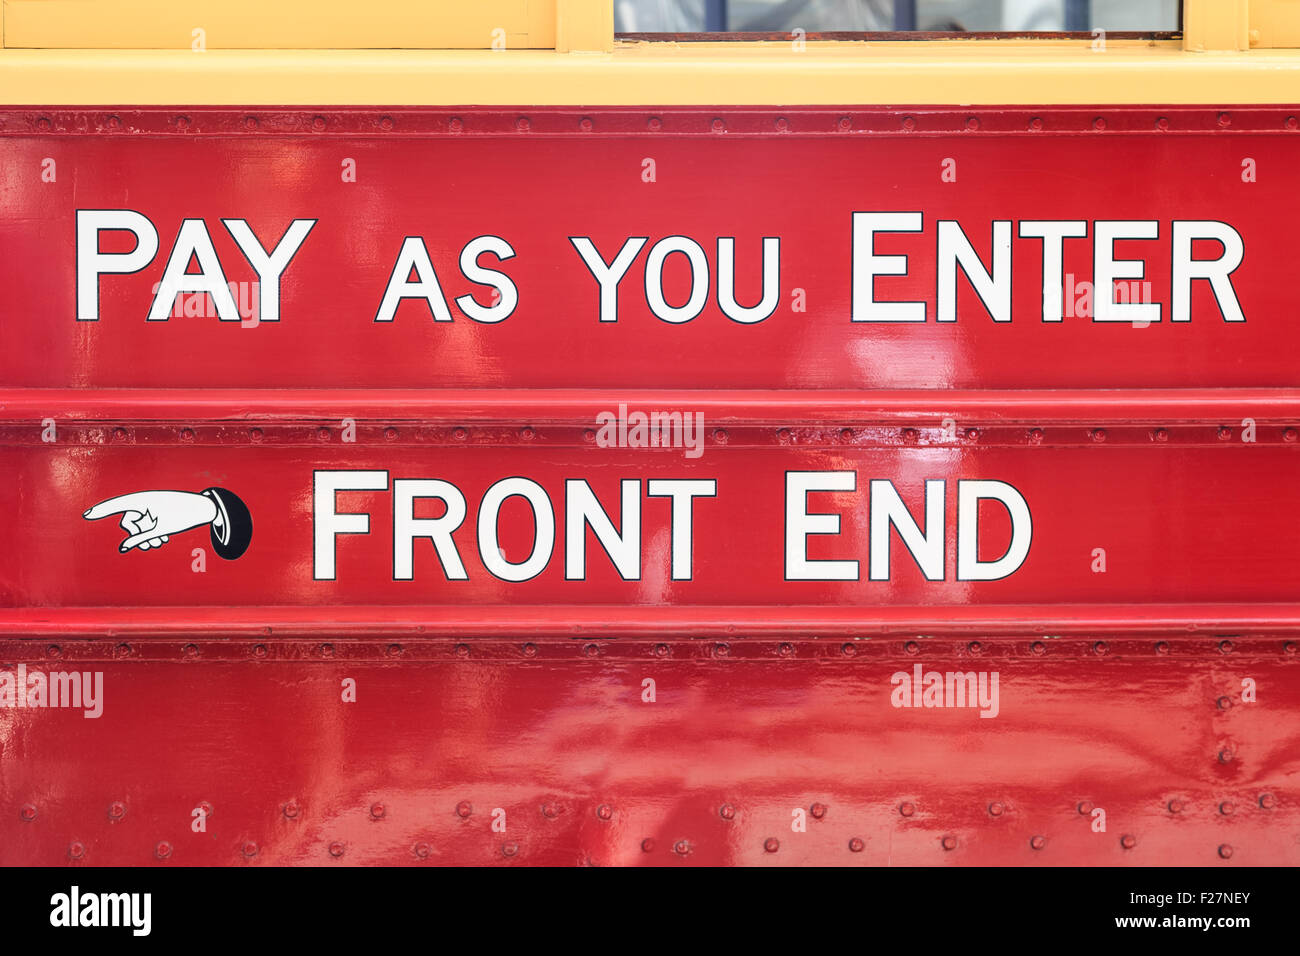 Text on an old touristic tram in Christchurch, New Zealand: pay as you enter - front end Stock Photo